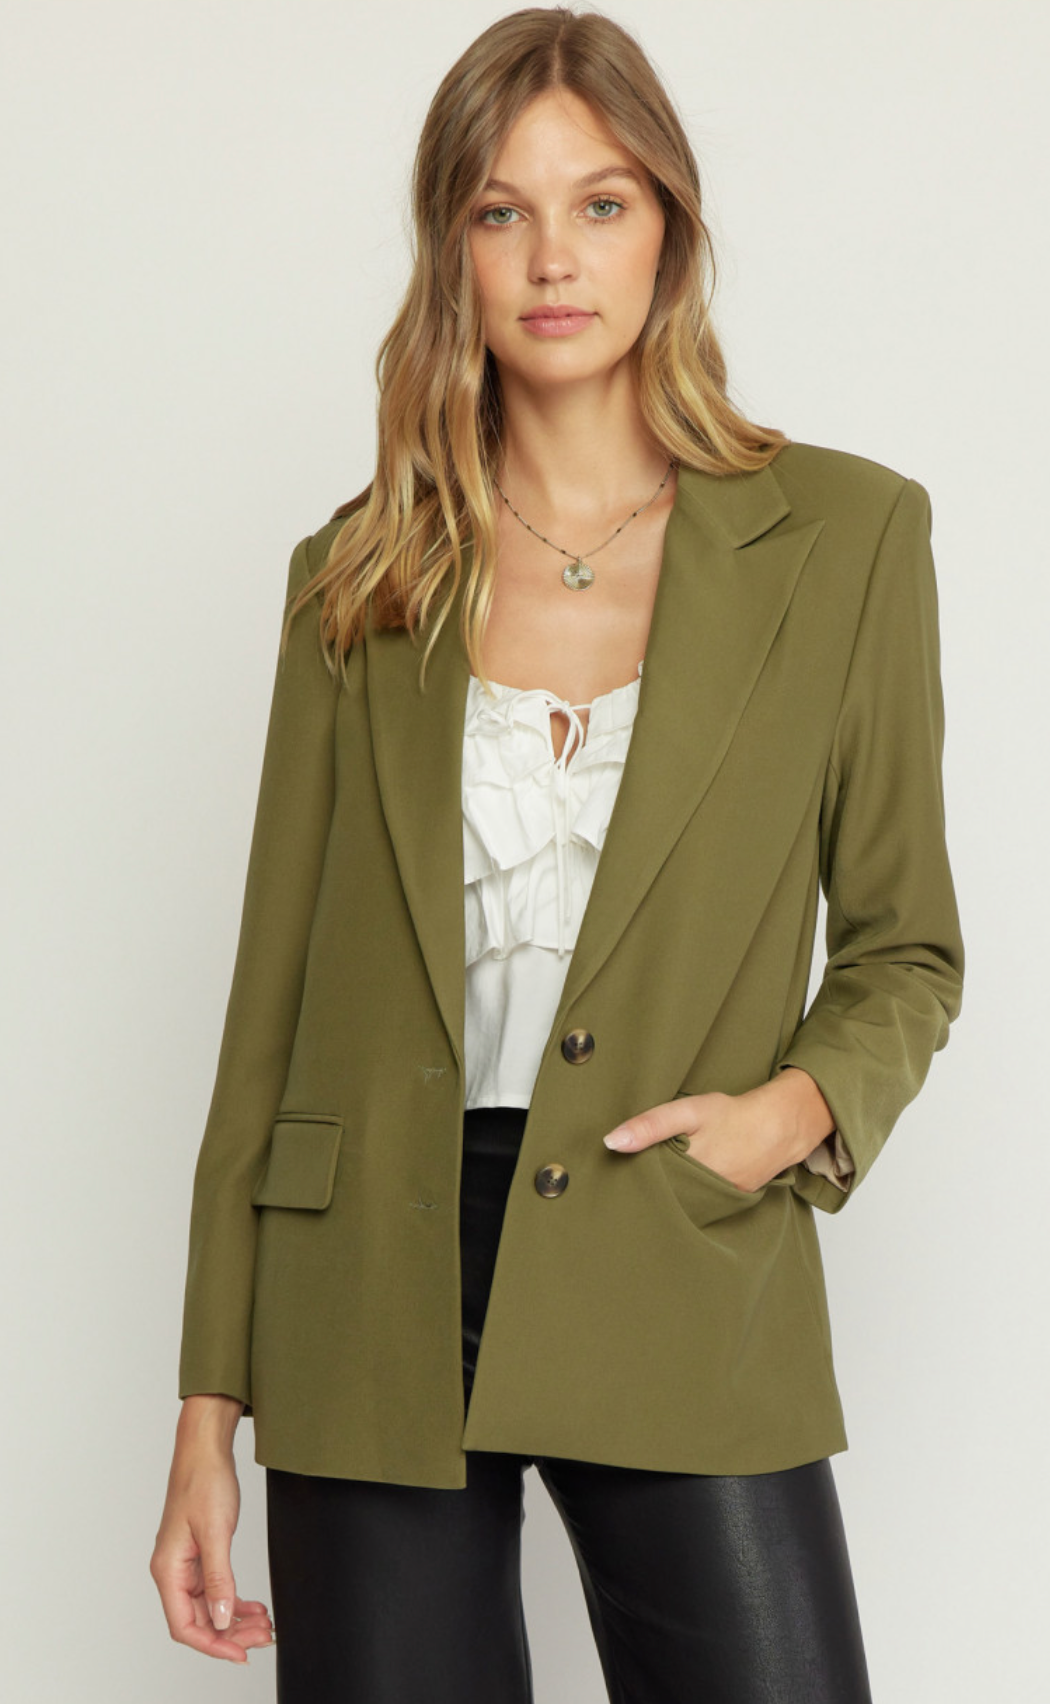 zSALE Greta Relaxed Fit Button Front Blazer - Olive